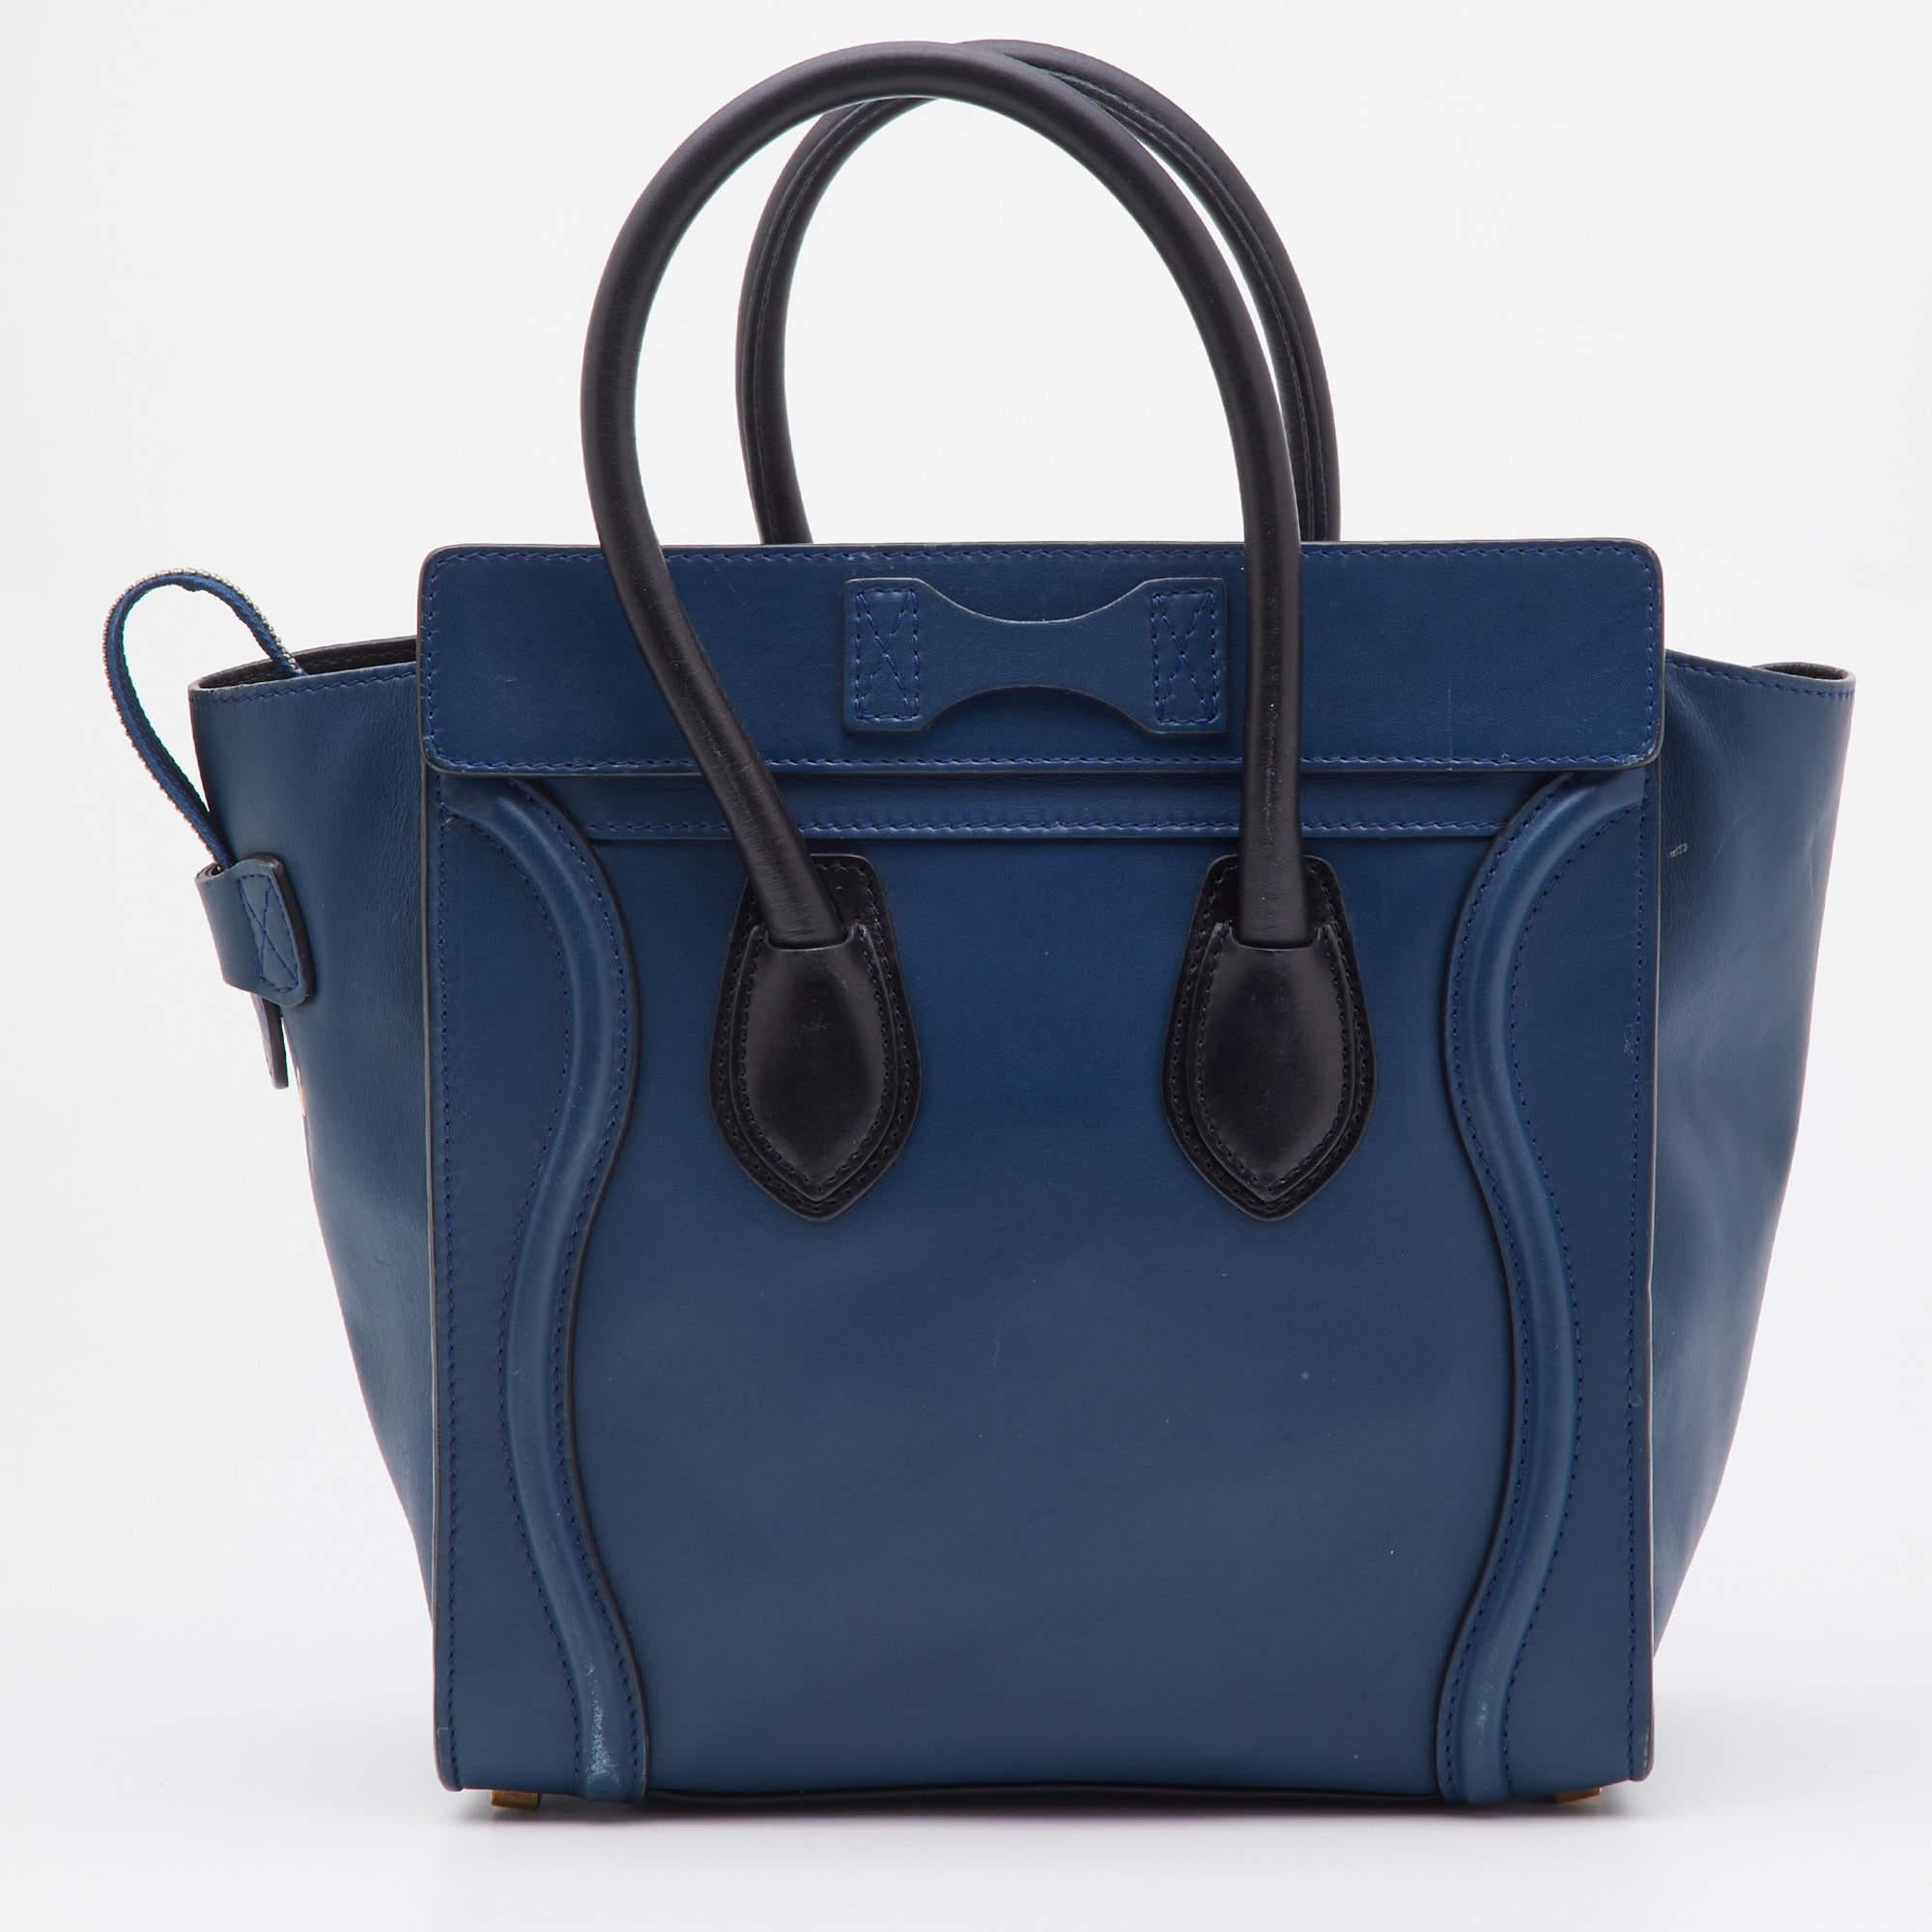 The Luggage tote from Celine is one of the most popular handbags in the world. This tote is crafted from leather and designed in a blue & black hue. It comes with rolled top handles and a front zip pocket. The bag is equipped with a well-sized